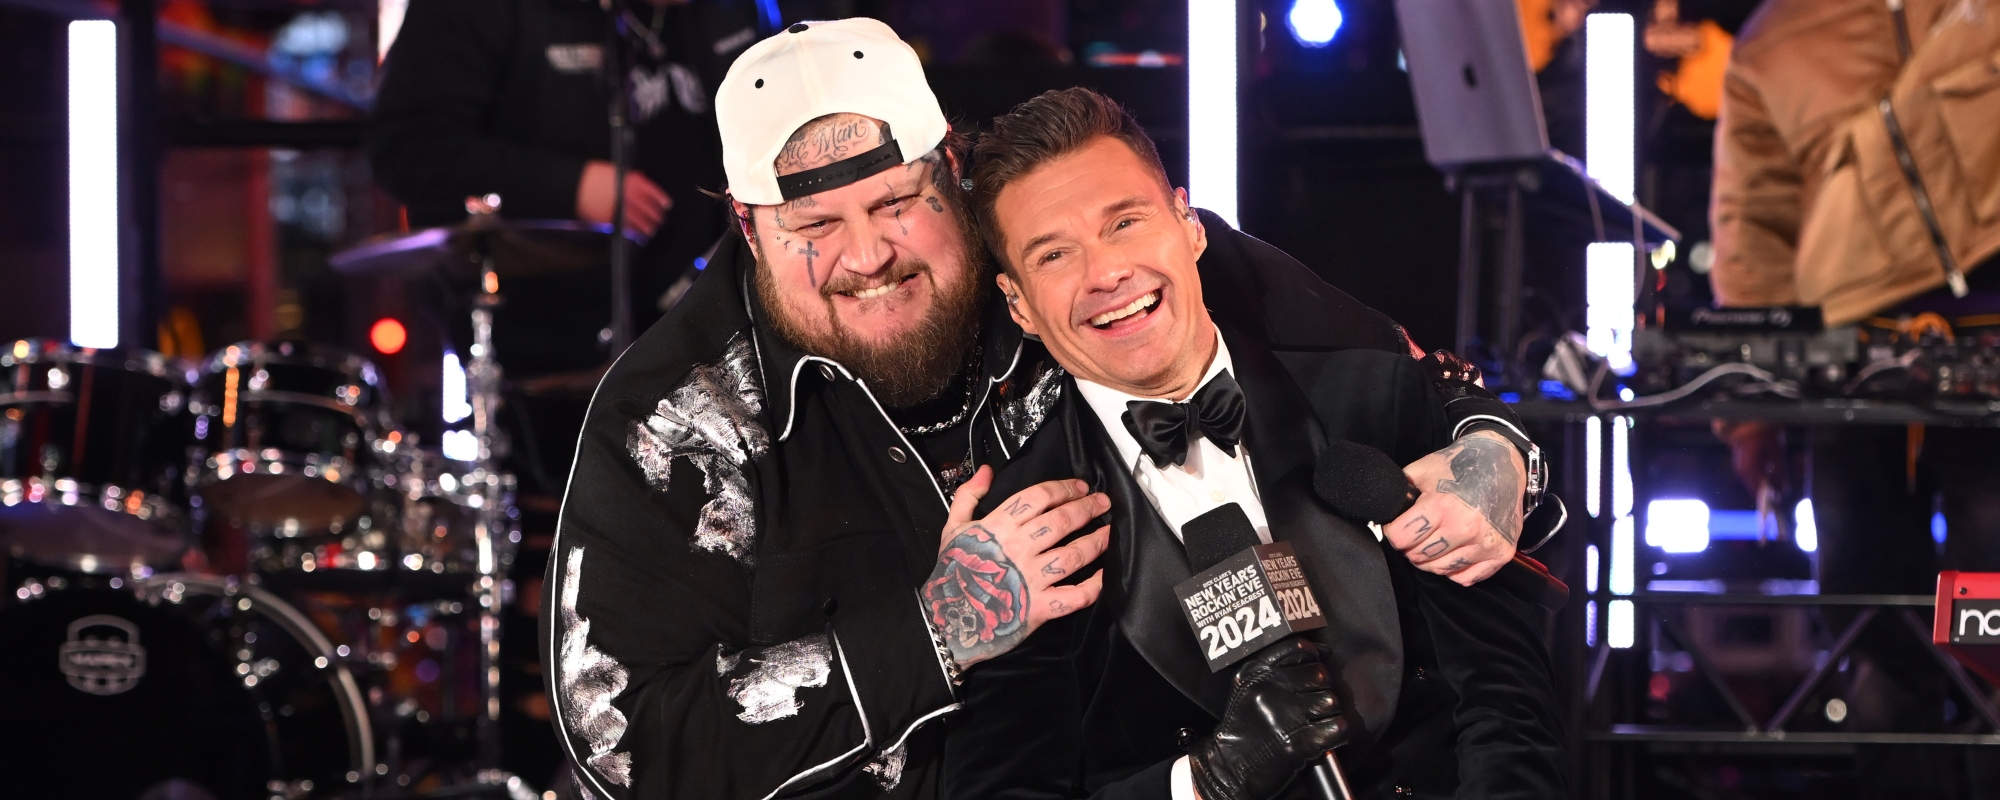 Watch Jelly Roll Swoop Ryan Seacrest Off His Feet, Perform Medley of Hits to Cap Off Breakout Year at ‘New Year’s Rockin’ Eve’